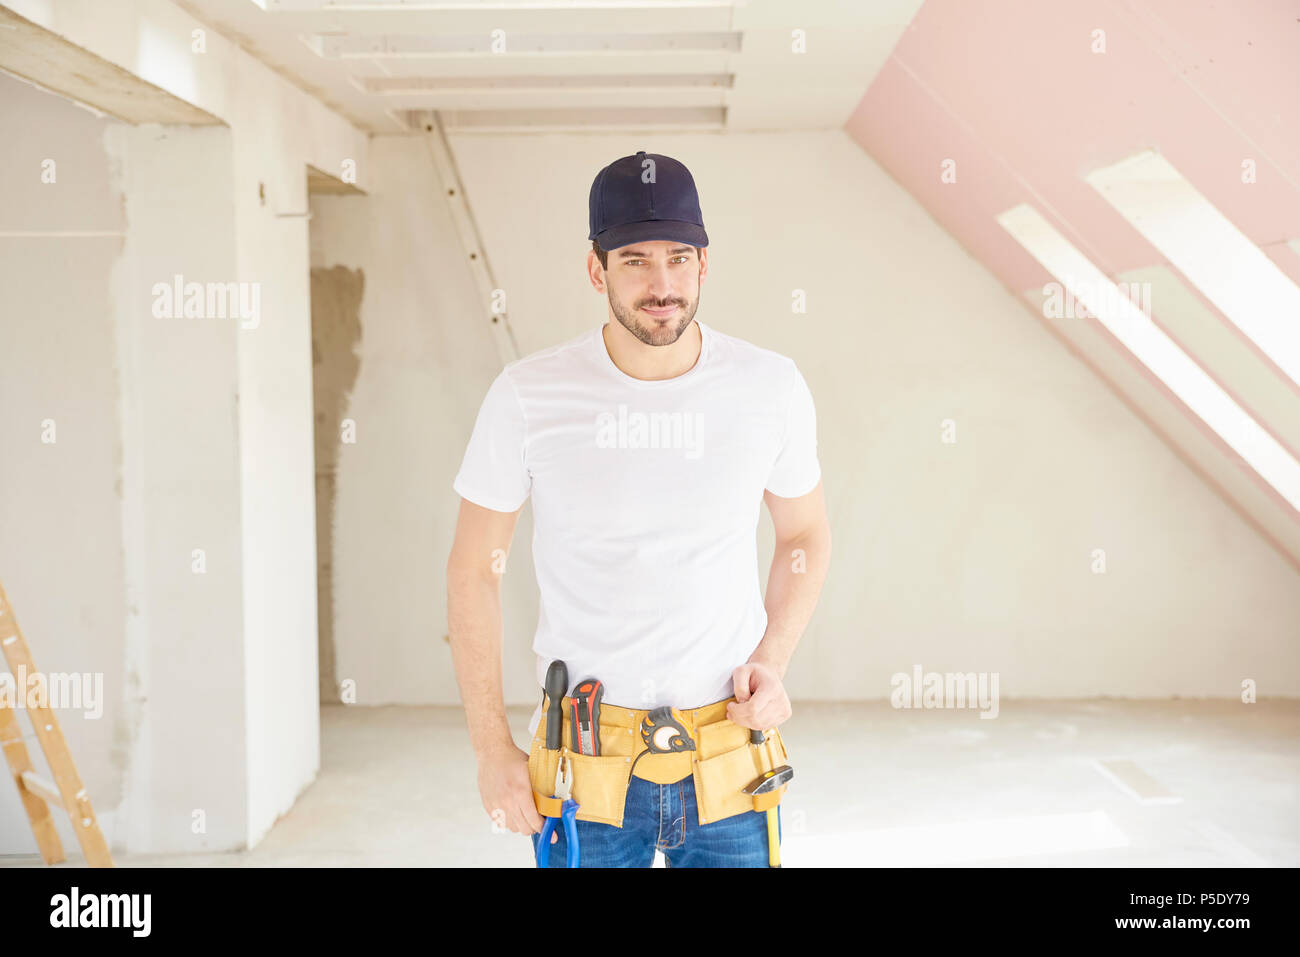 Portrait of young handyman wearing baseball cap and tool belt while standing at construction site. Stock Photo